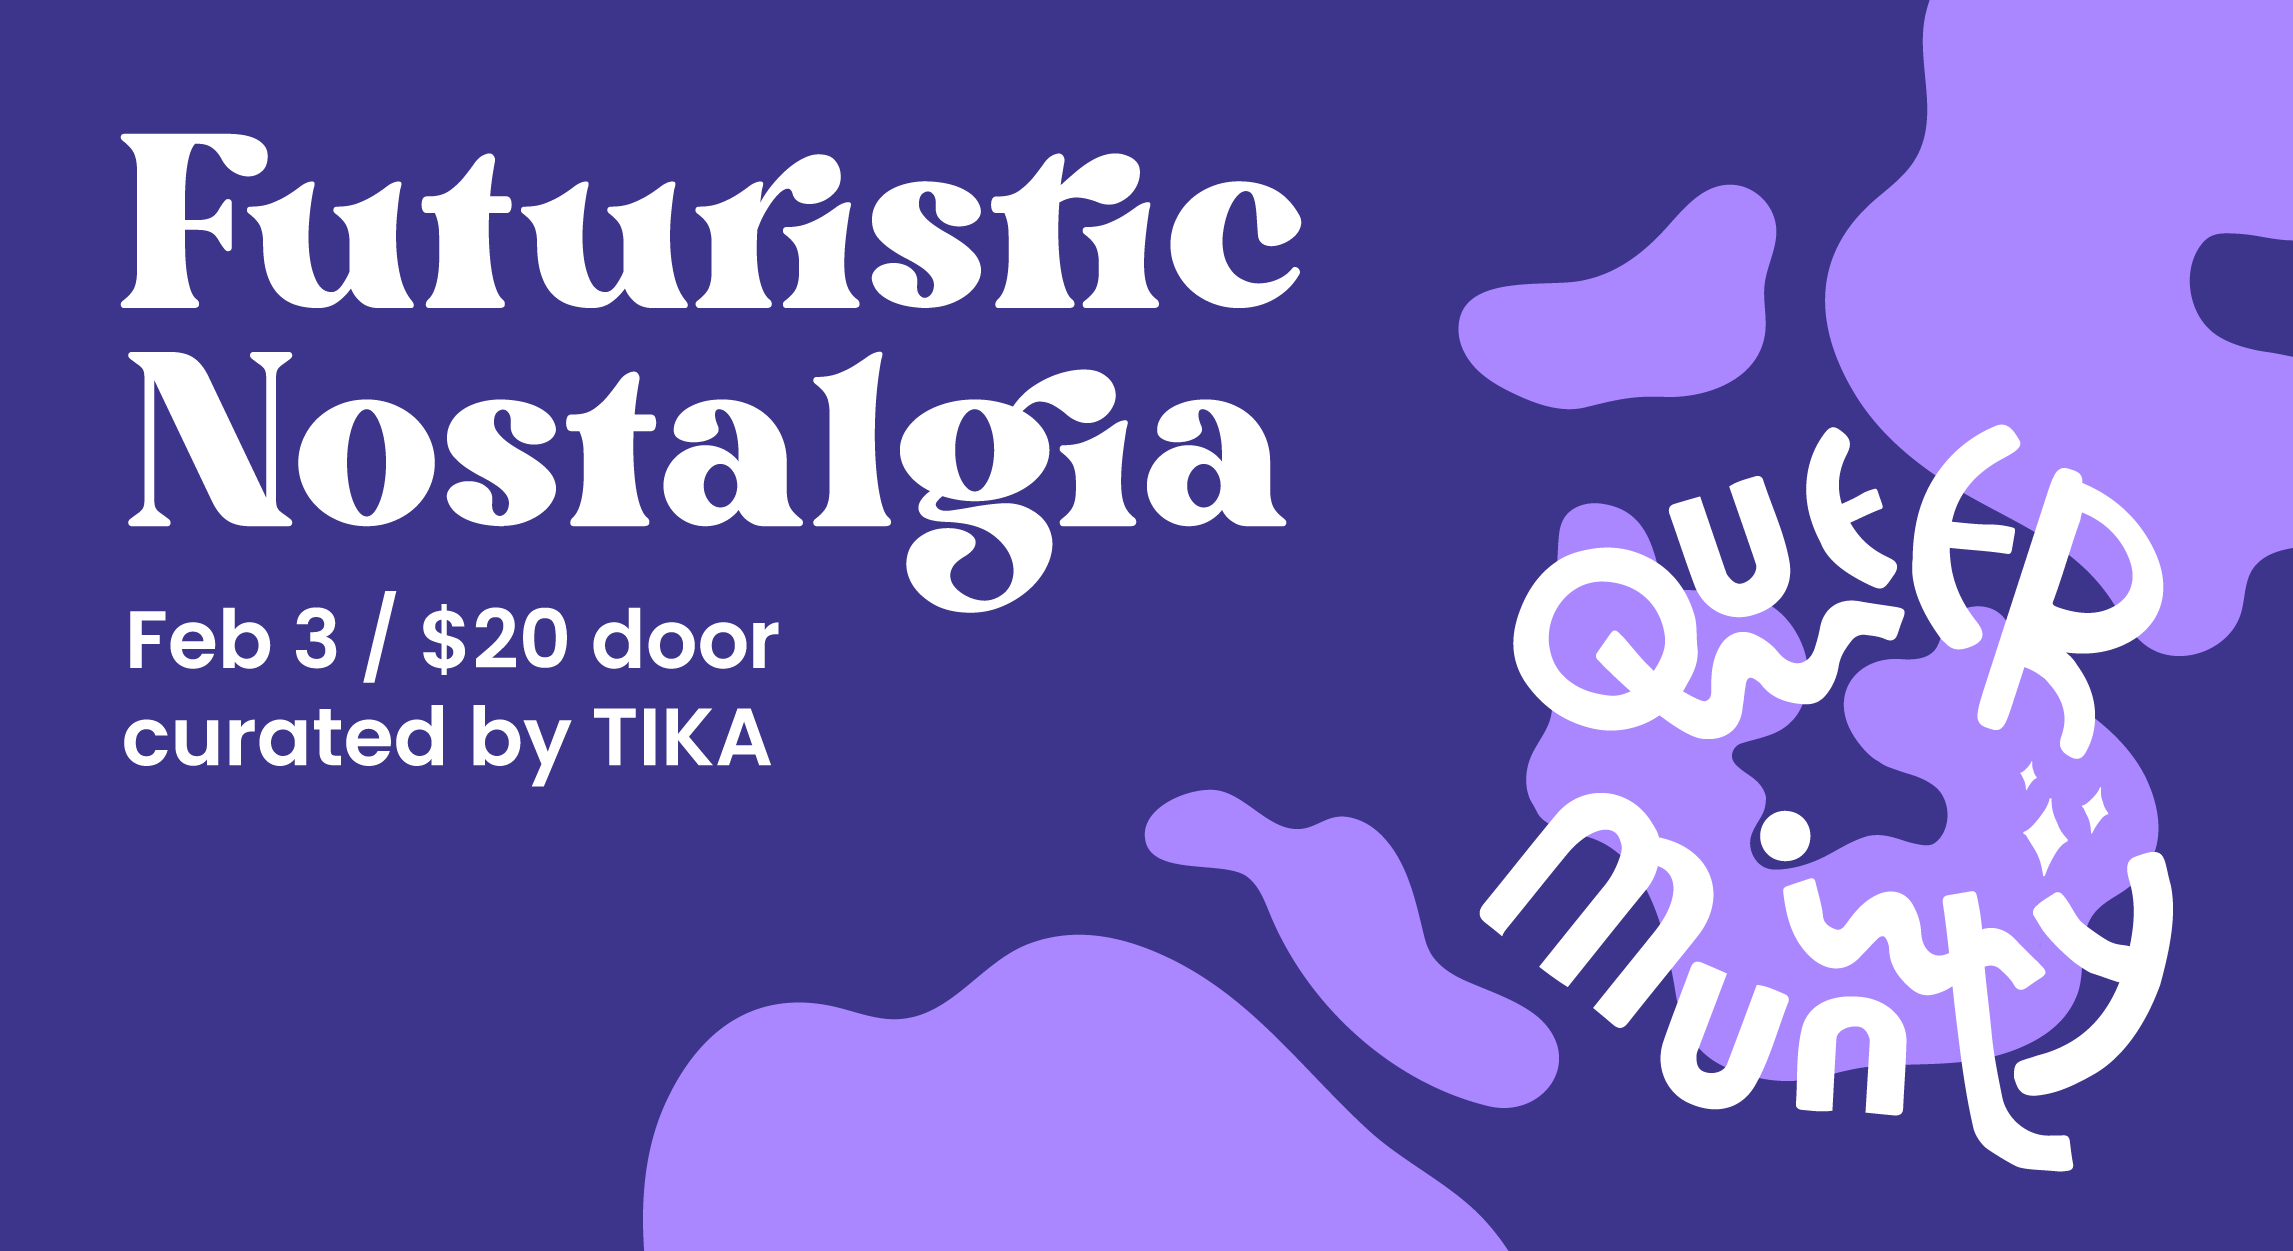 Queermunity 4 / Futuristic Nostalgia, February 3, $20 at the Door, curated by TIKA